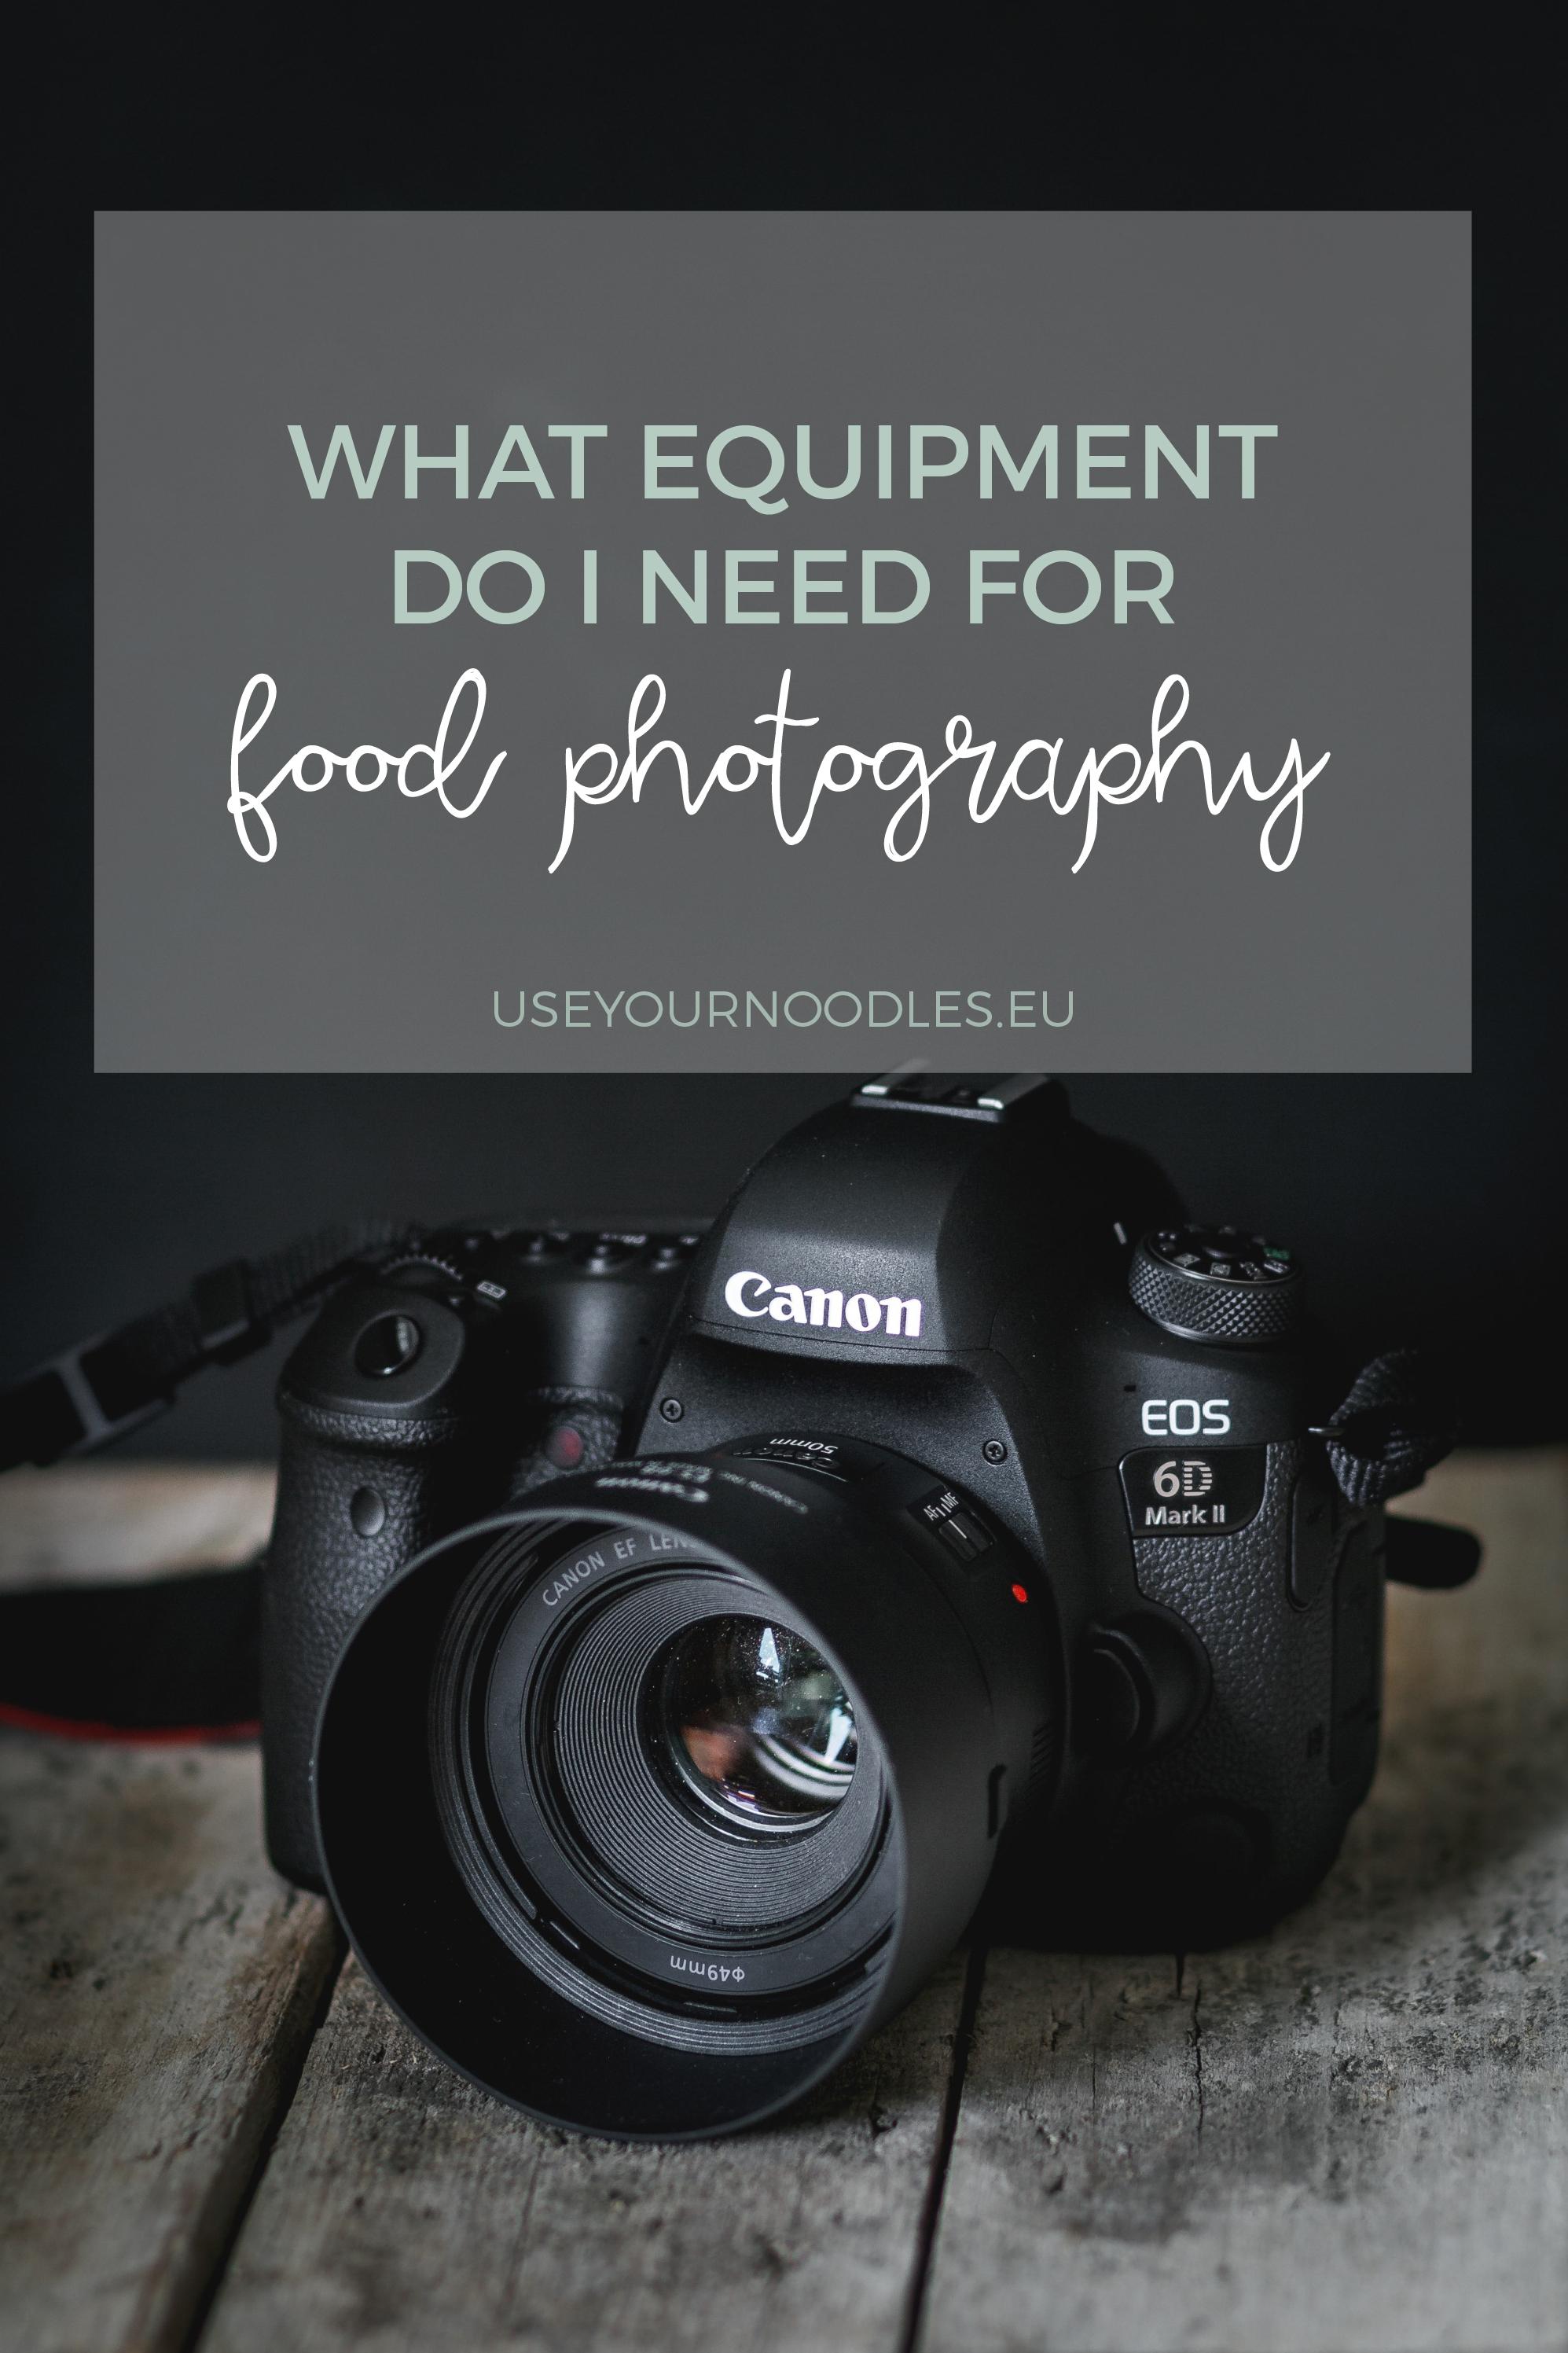 There is so much photography equipment out there but is all that necessary to create beautiful food photos. No, definitely not! Today, I’m sharing a few food photography equipment essentials, that I feel are necessary to produce great shots.